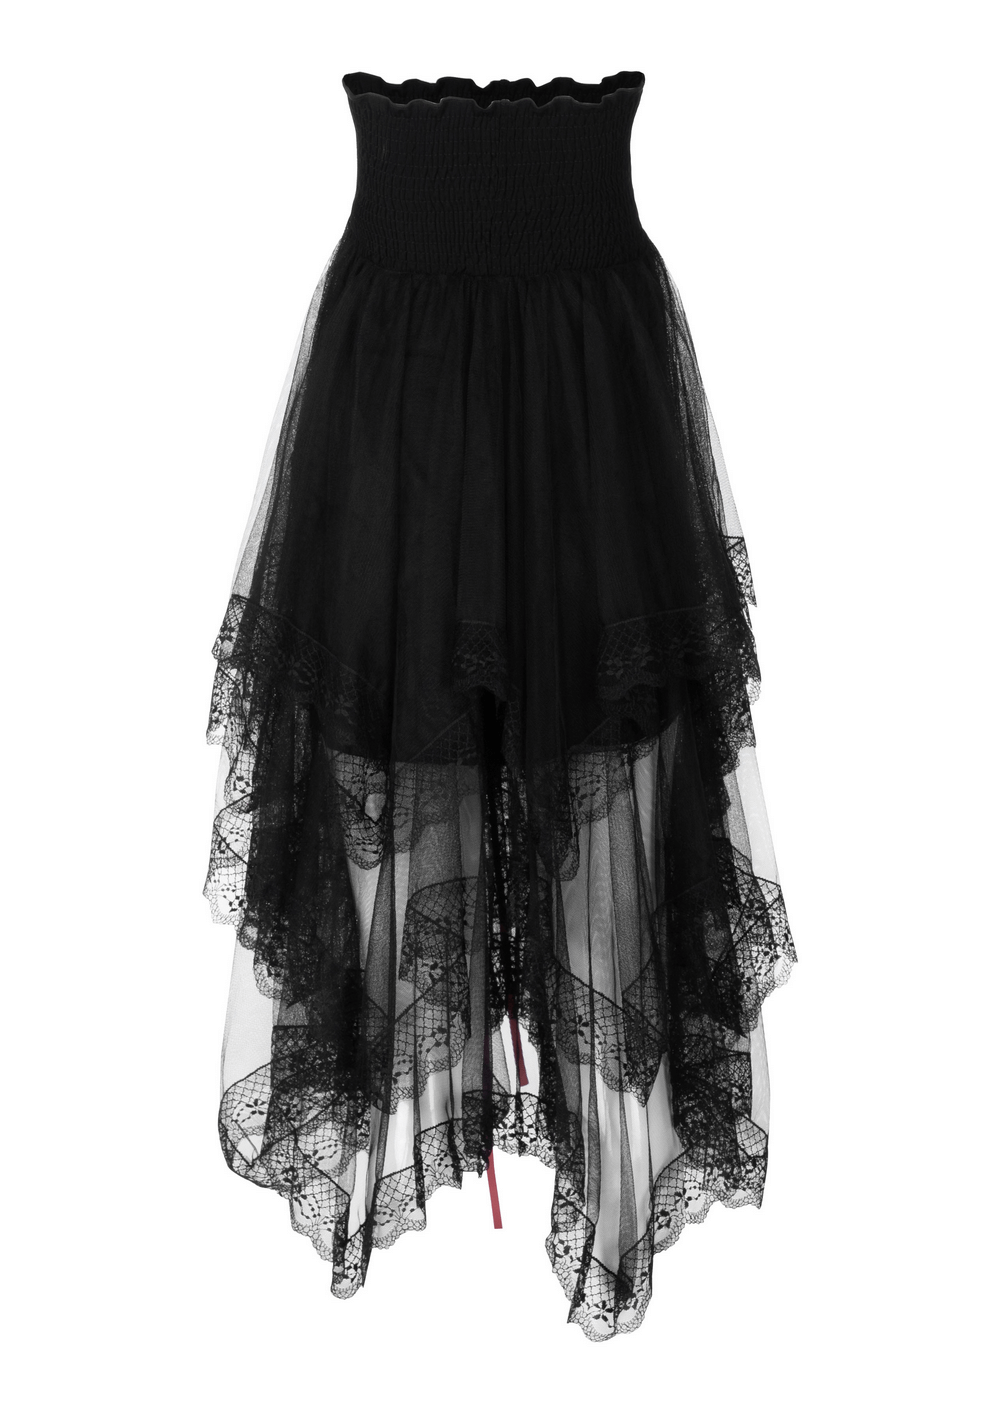 Gothic Punk Lace Skirt with Pink Corset Detail